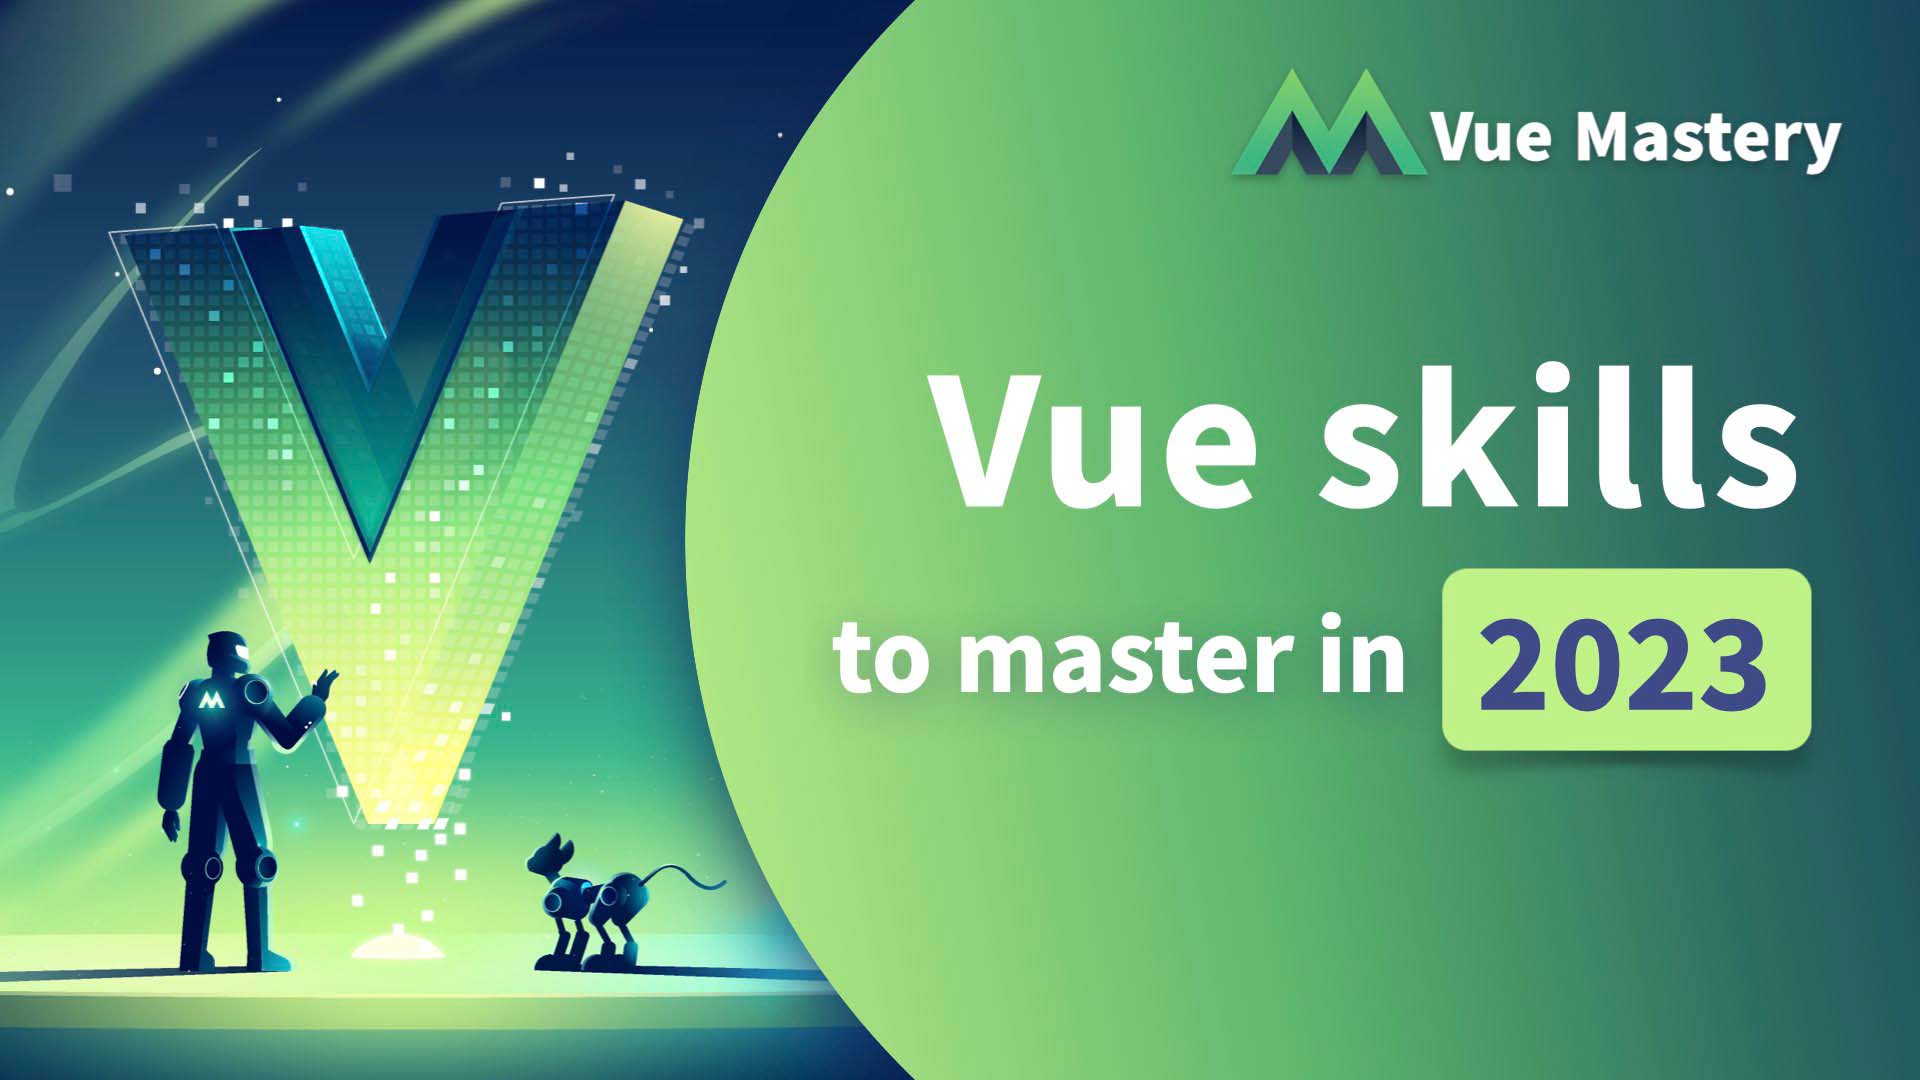 Vue skills to master in 2023